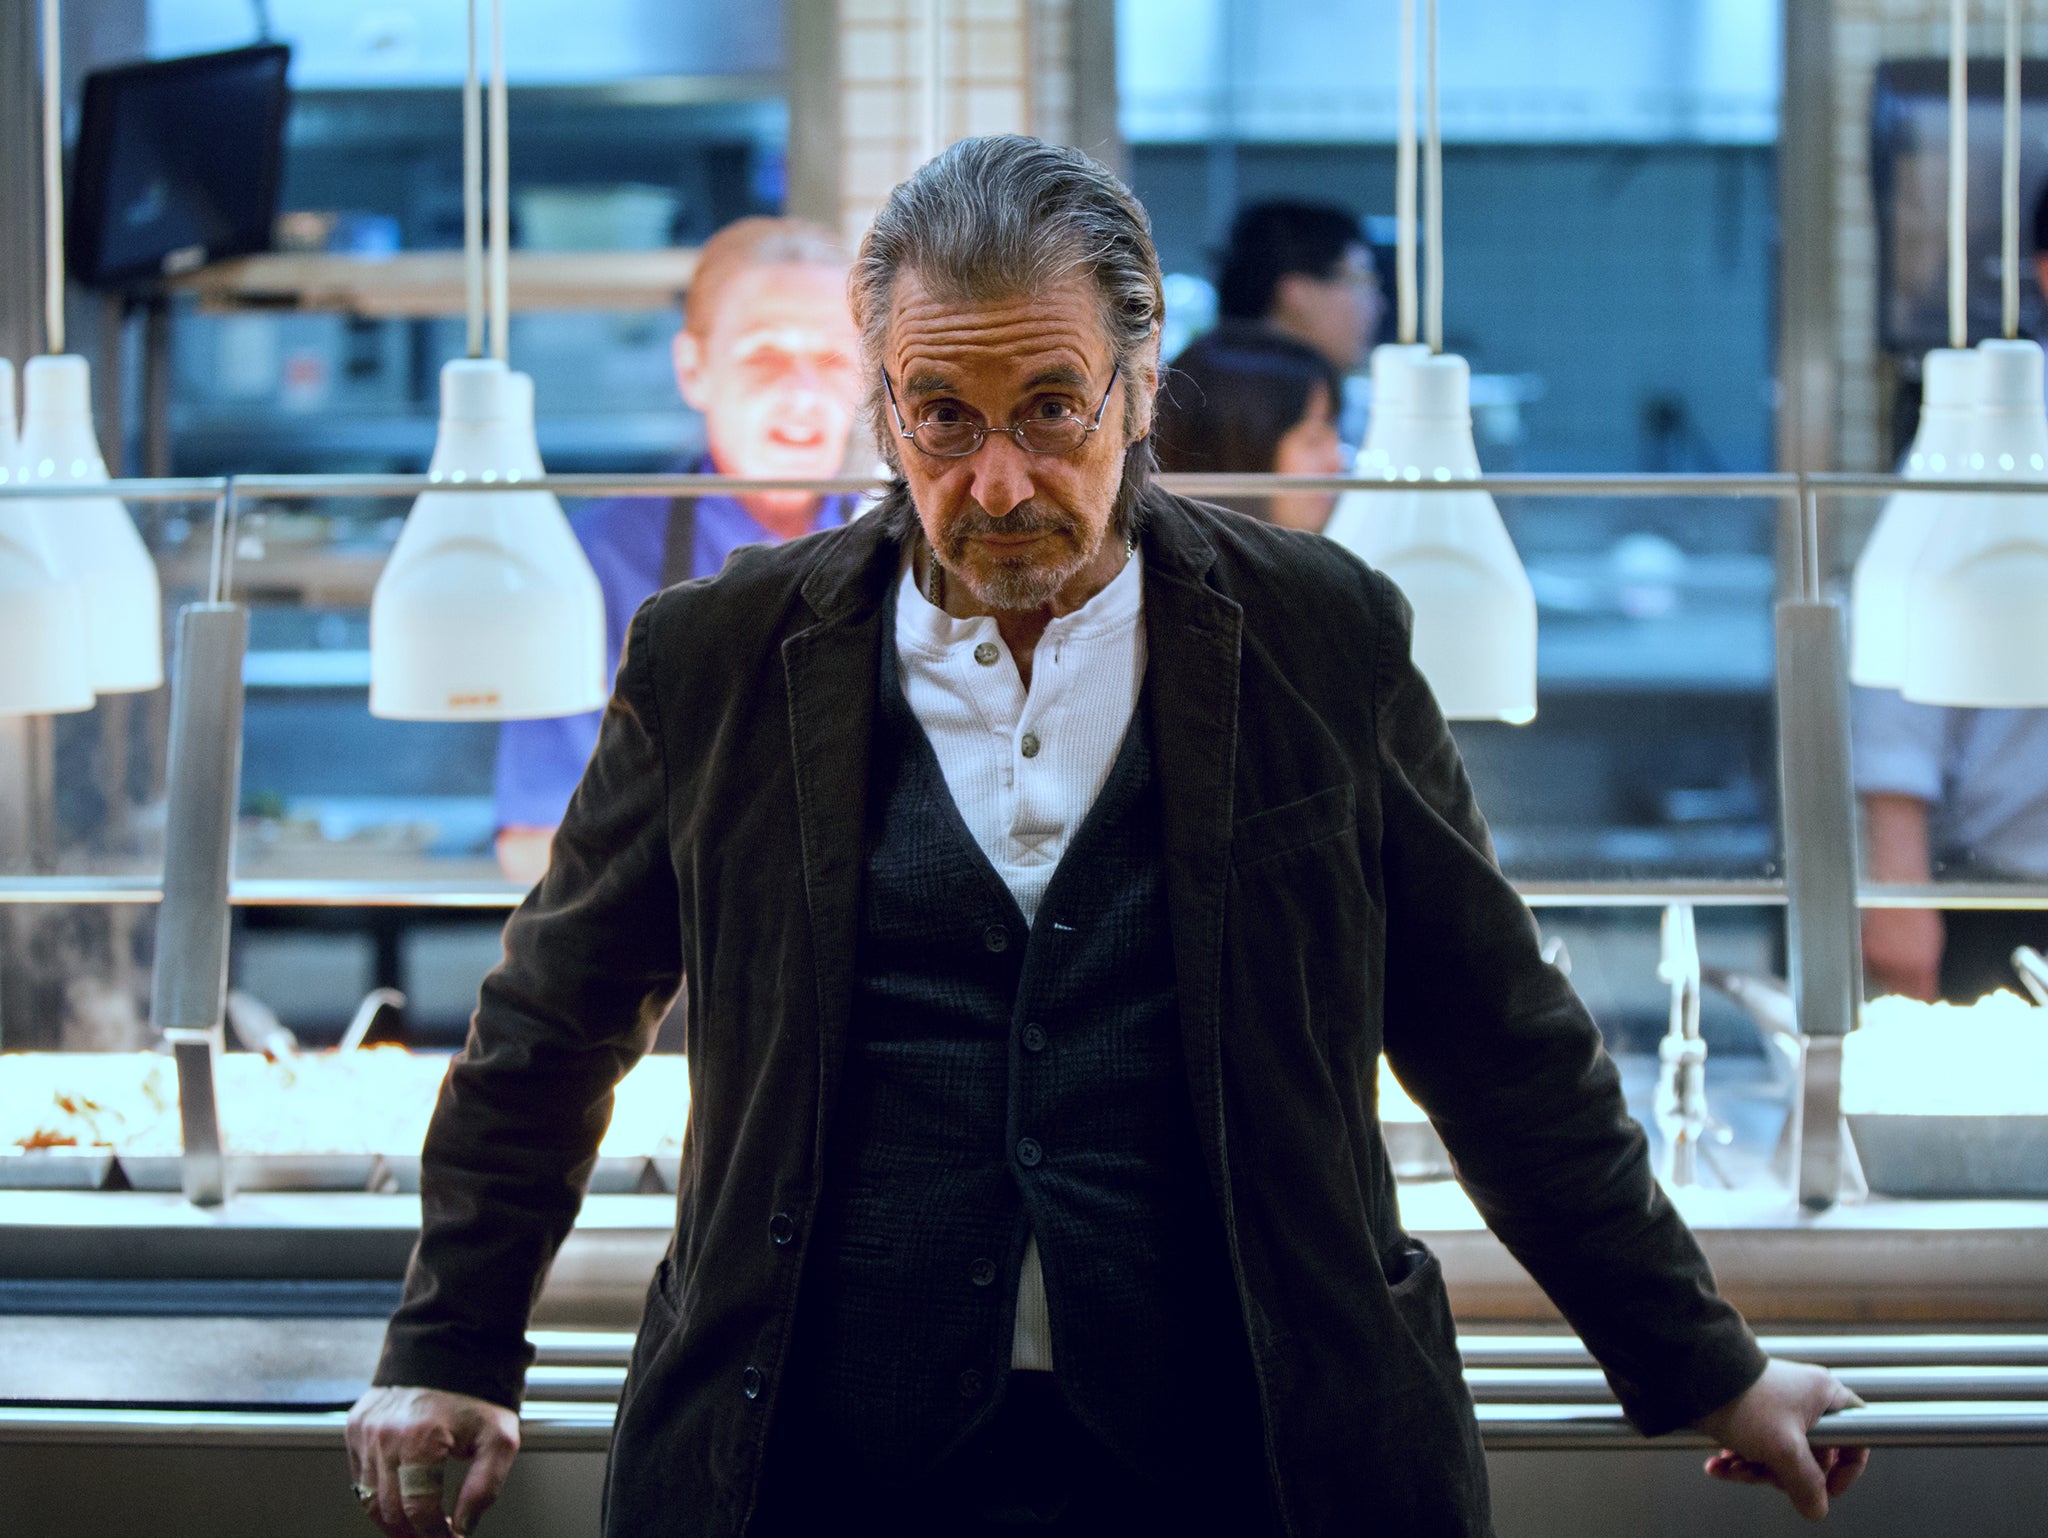 Al Pacino in a still from the movie Manglehorn